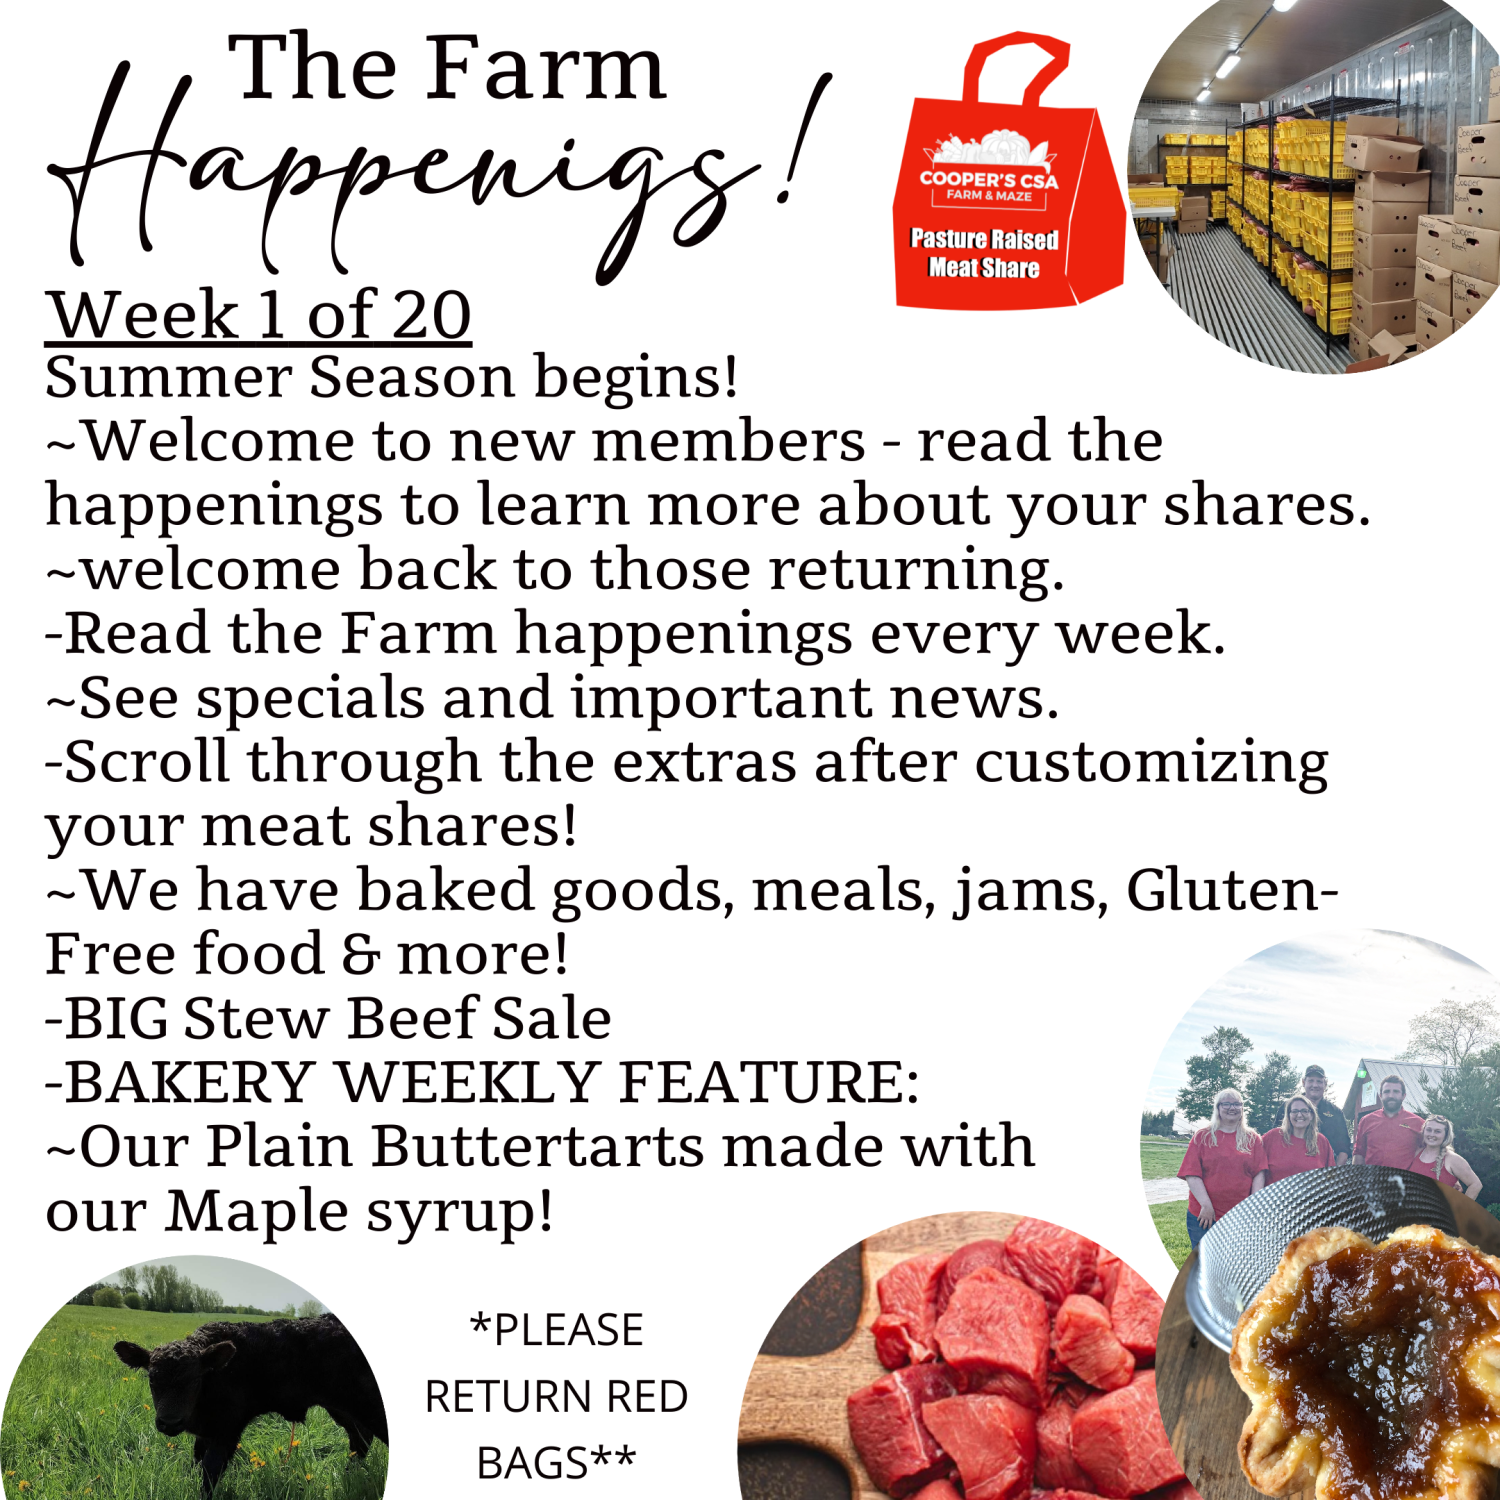 "Pasture Meat Shares"-Coopers CSA Farm Farm Happenings;Week 1 of 20